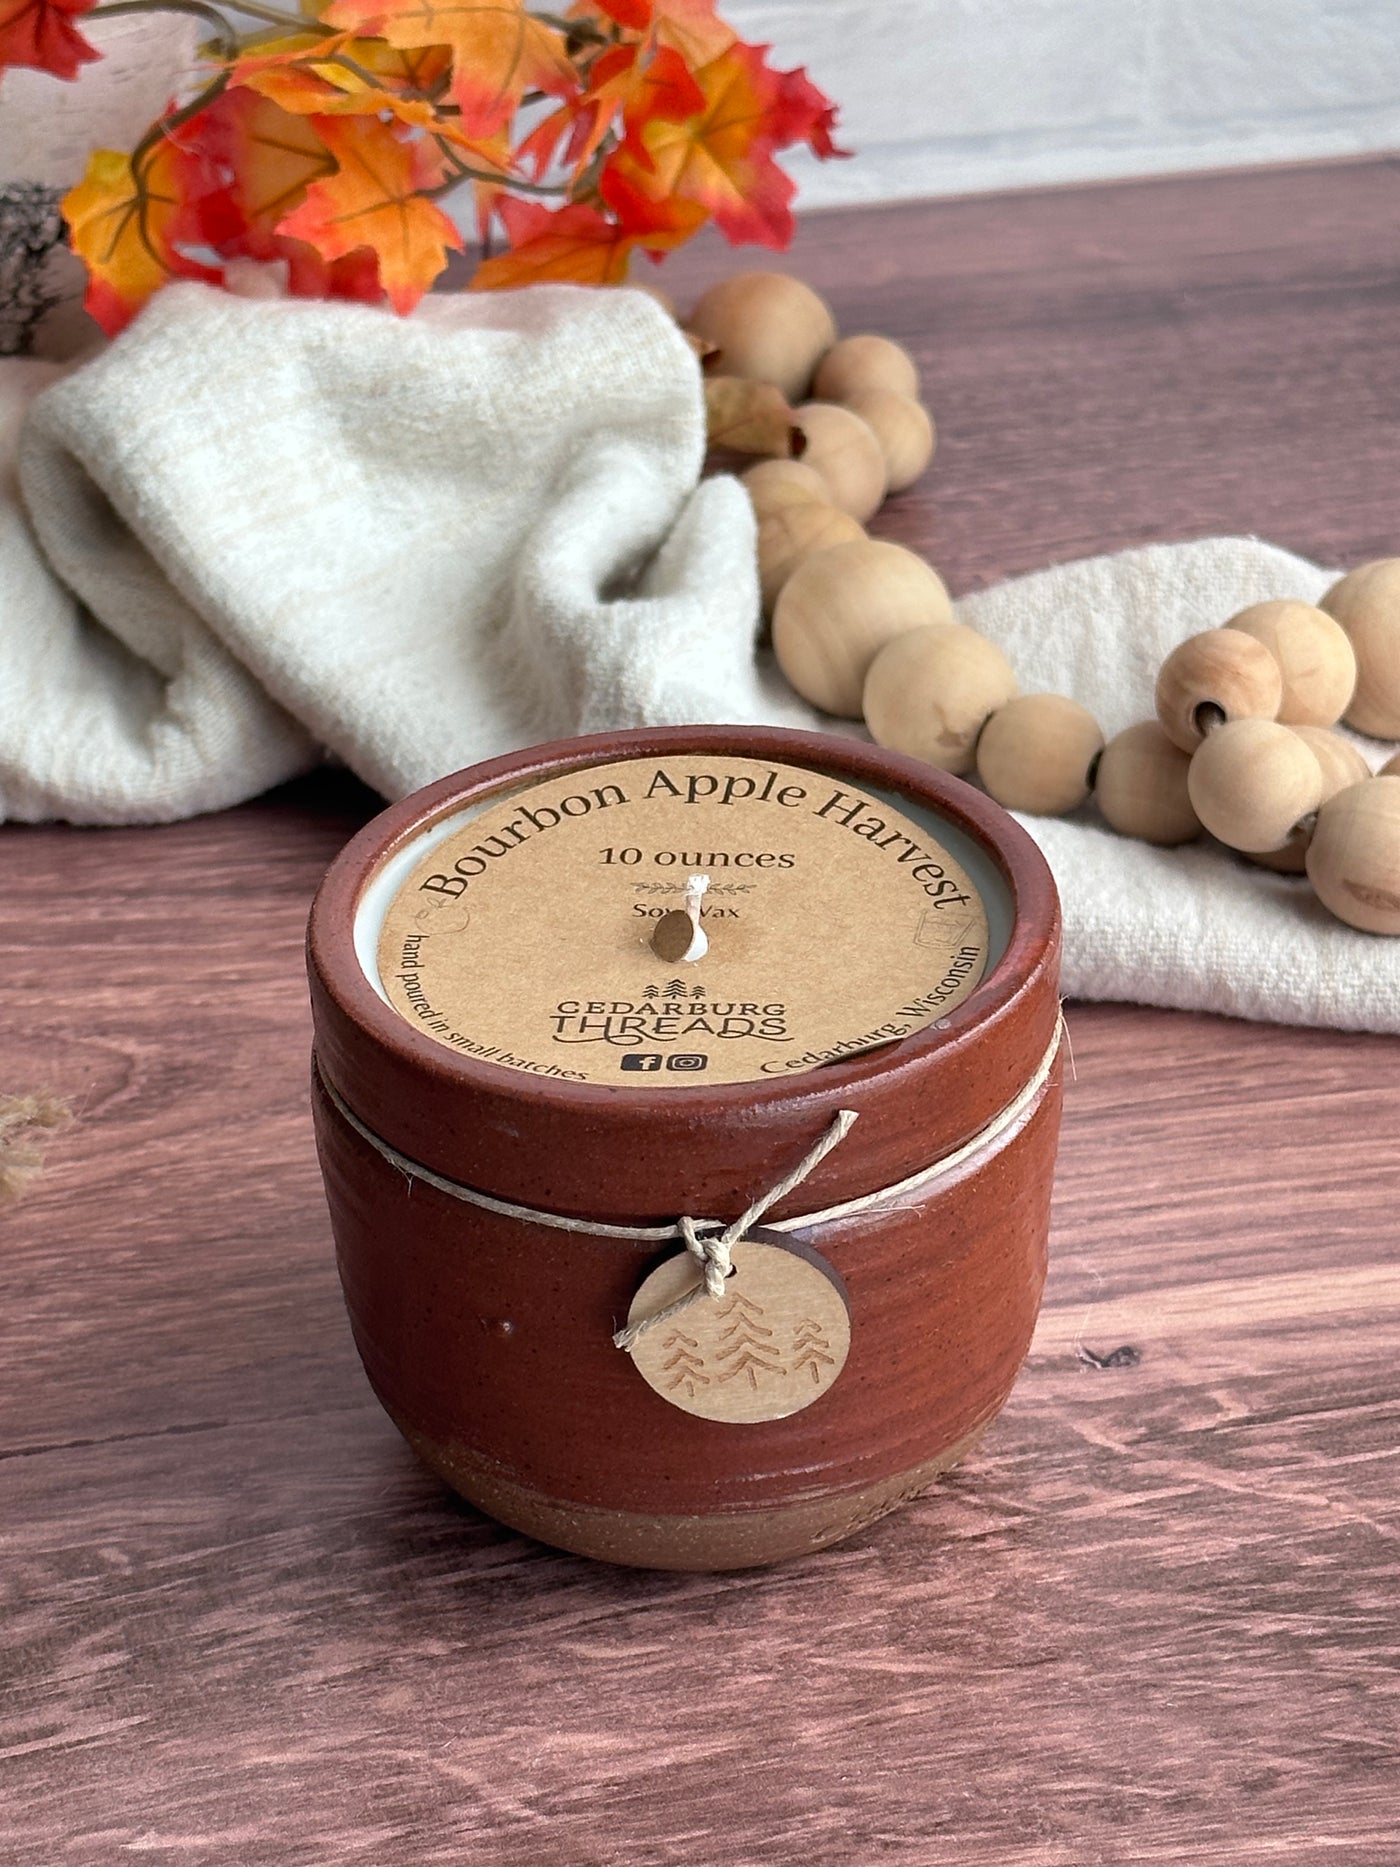 Bourbon Apple Harvest soy candle 10 ounces in brown ceramic vessel